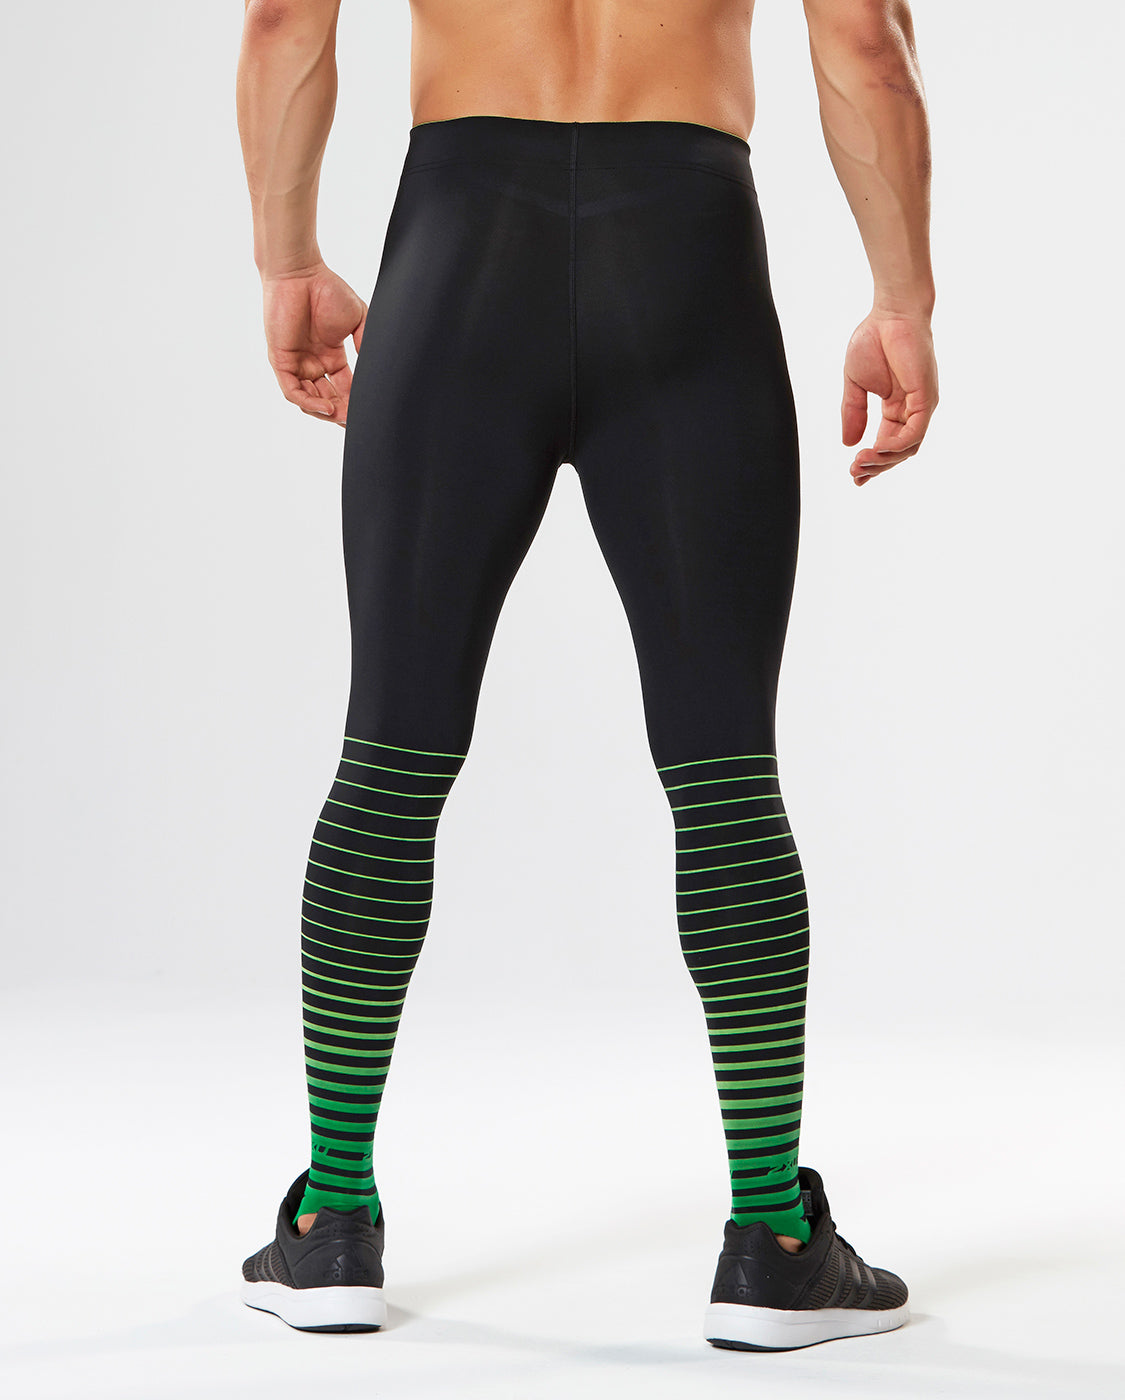 MEN'S POWER RECOVERY COMPRESSION TIGHTS | KEY POWER – Key Power Sports